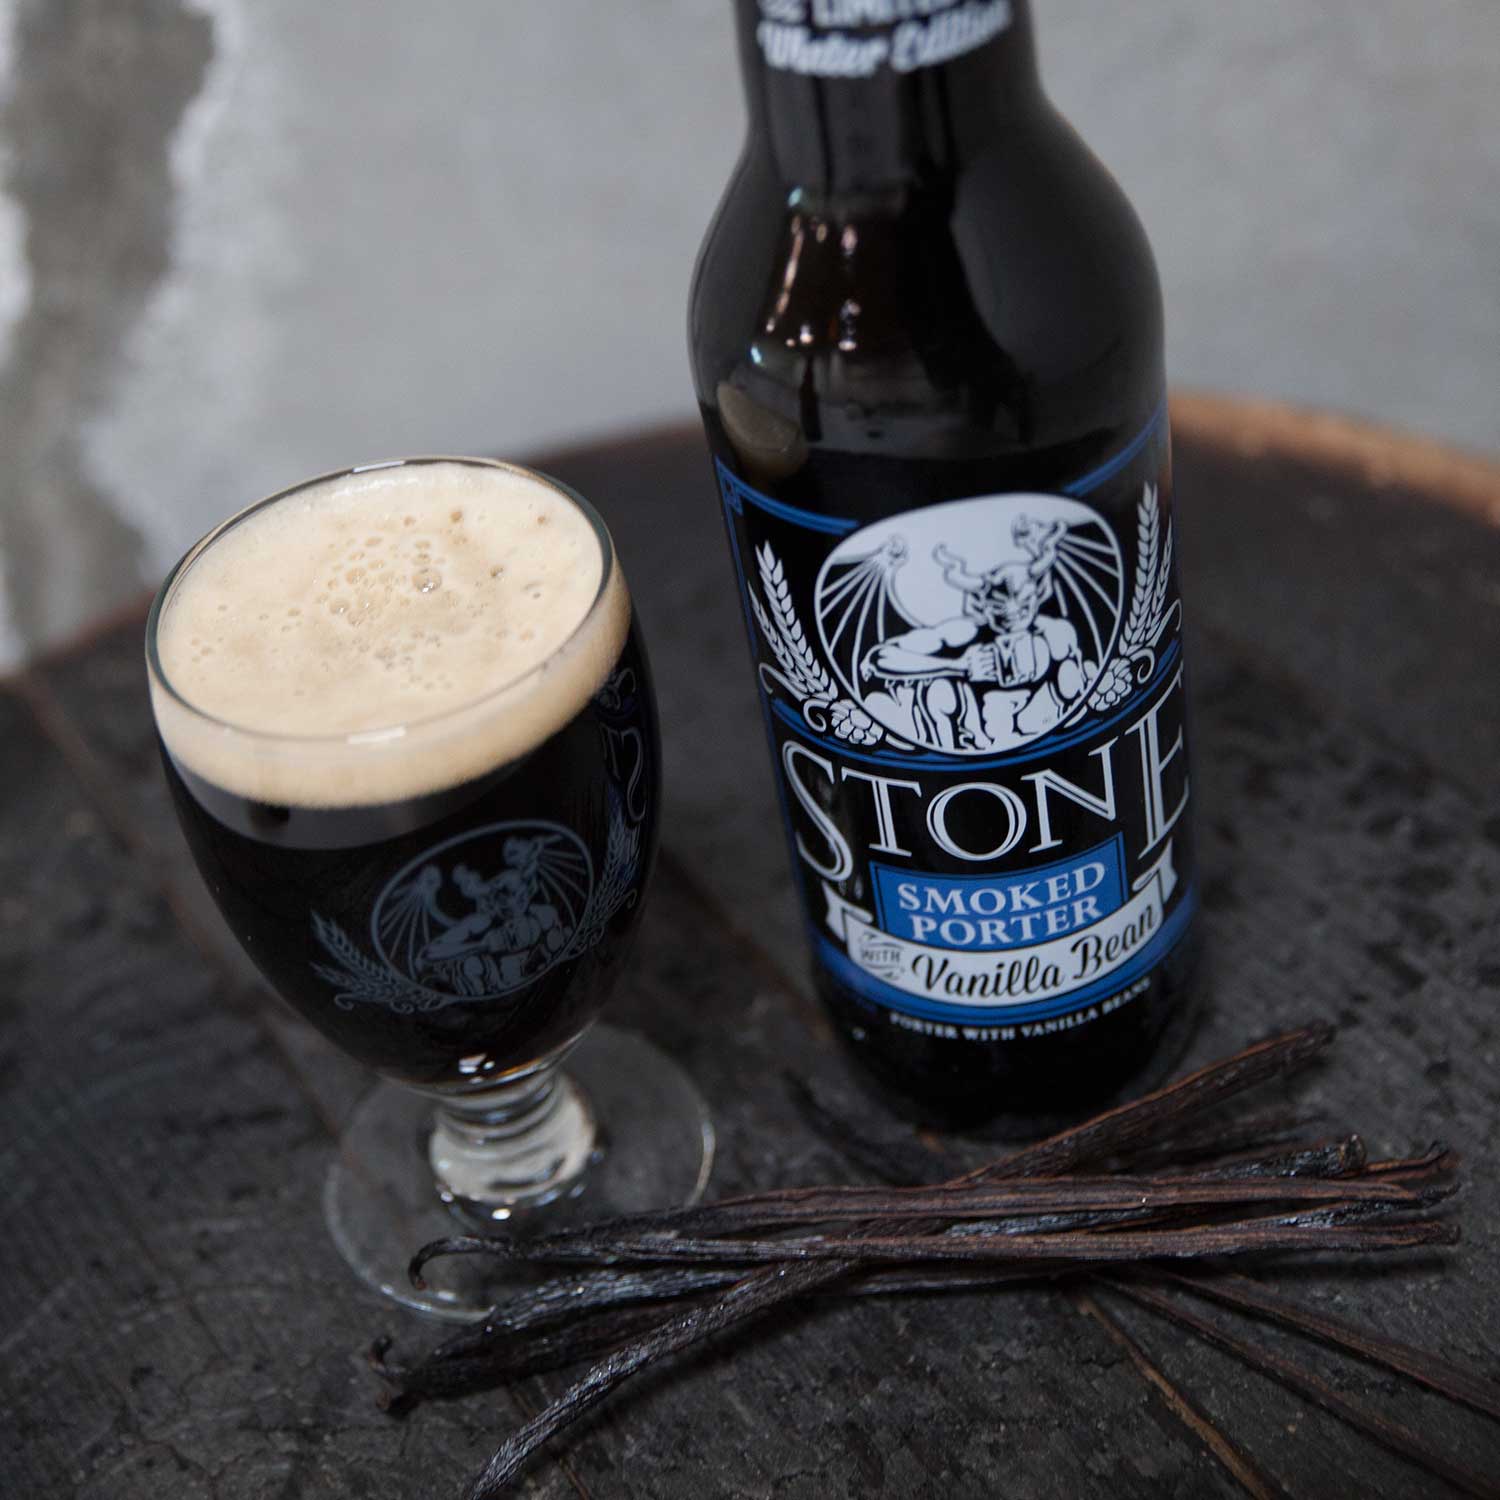 Glass and bottle of Stone Smoked Porter w/Vanilla Bean